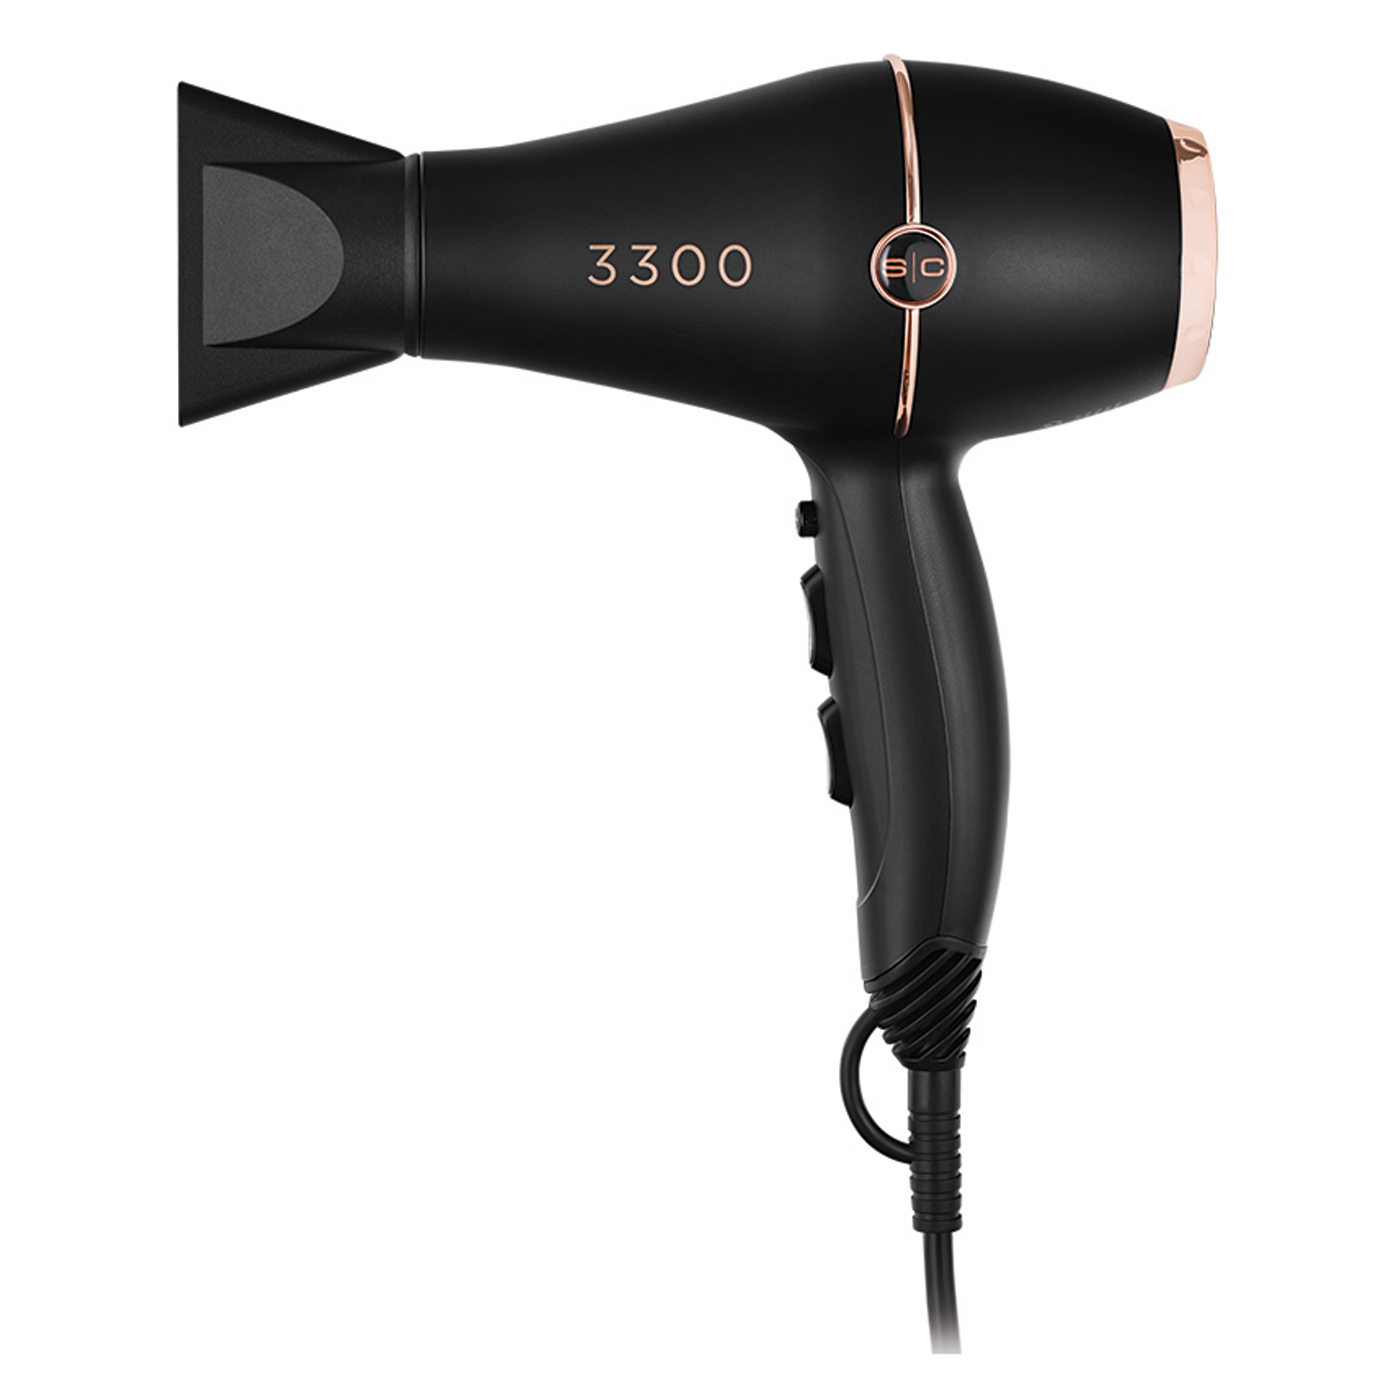 3300 Supercharged Nano-Compact Hair Dryer